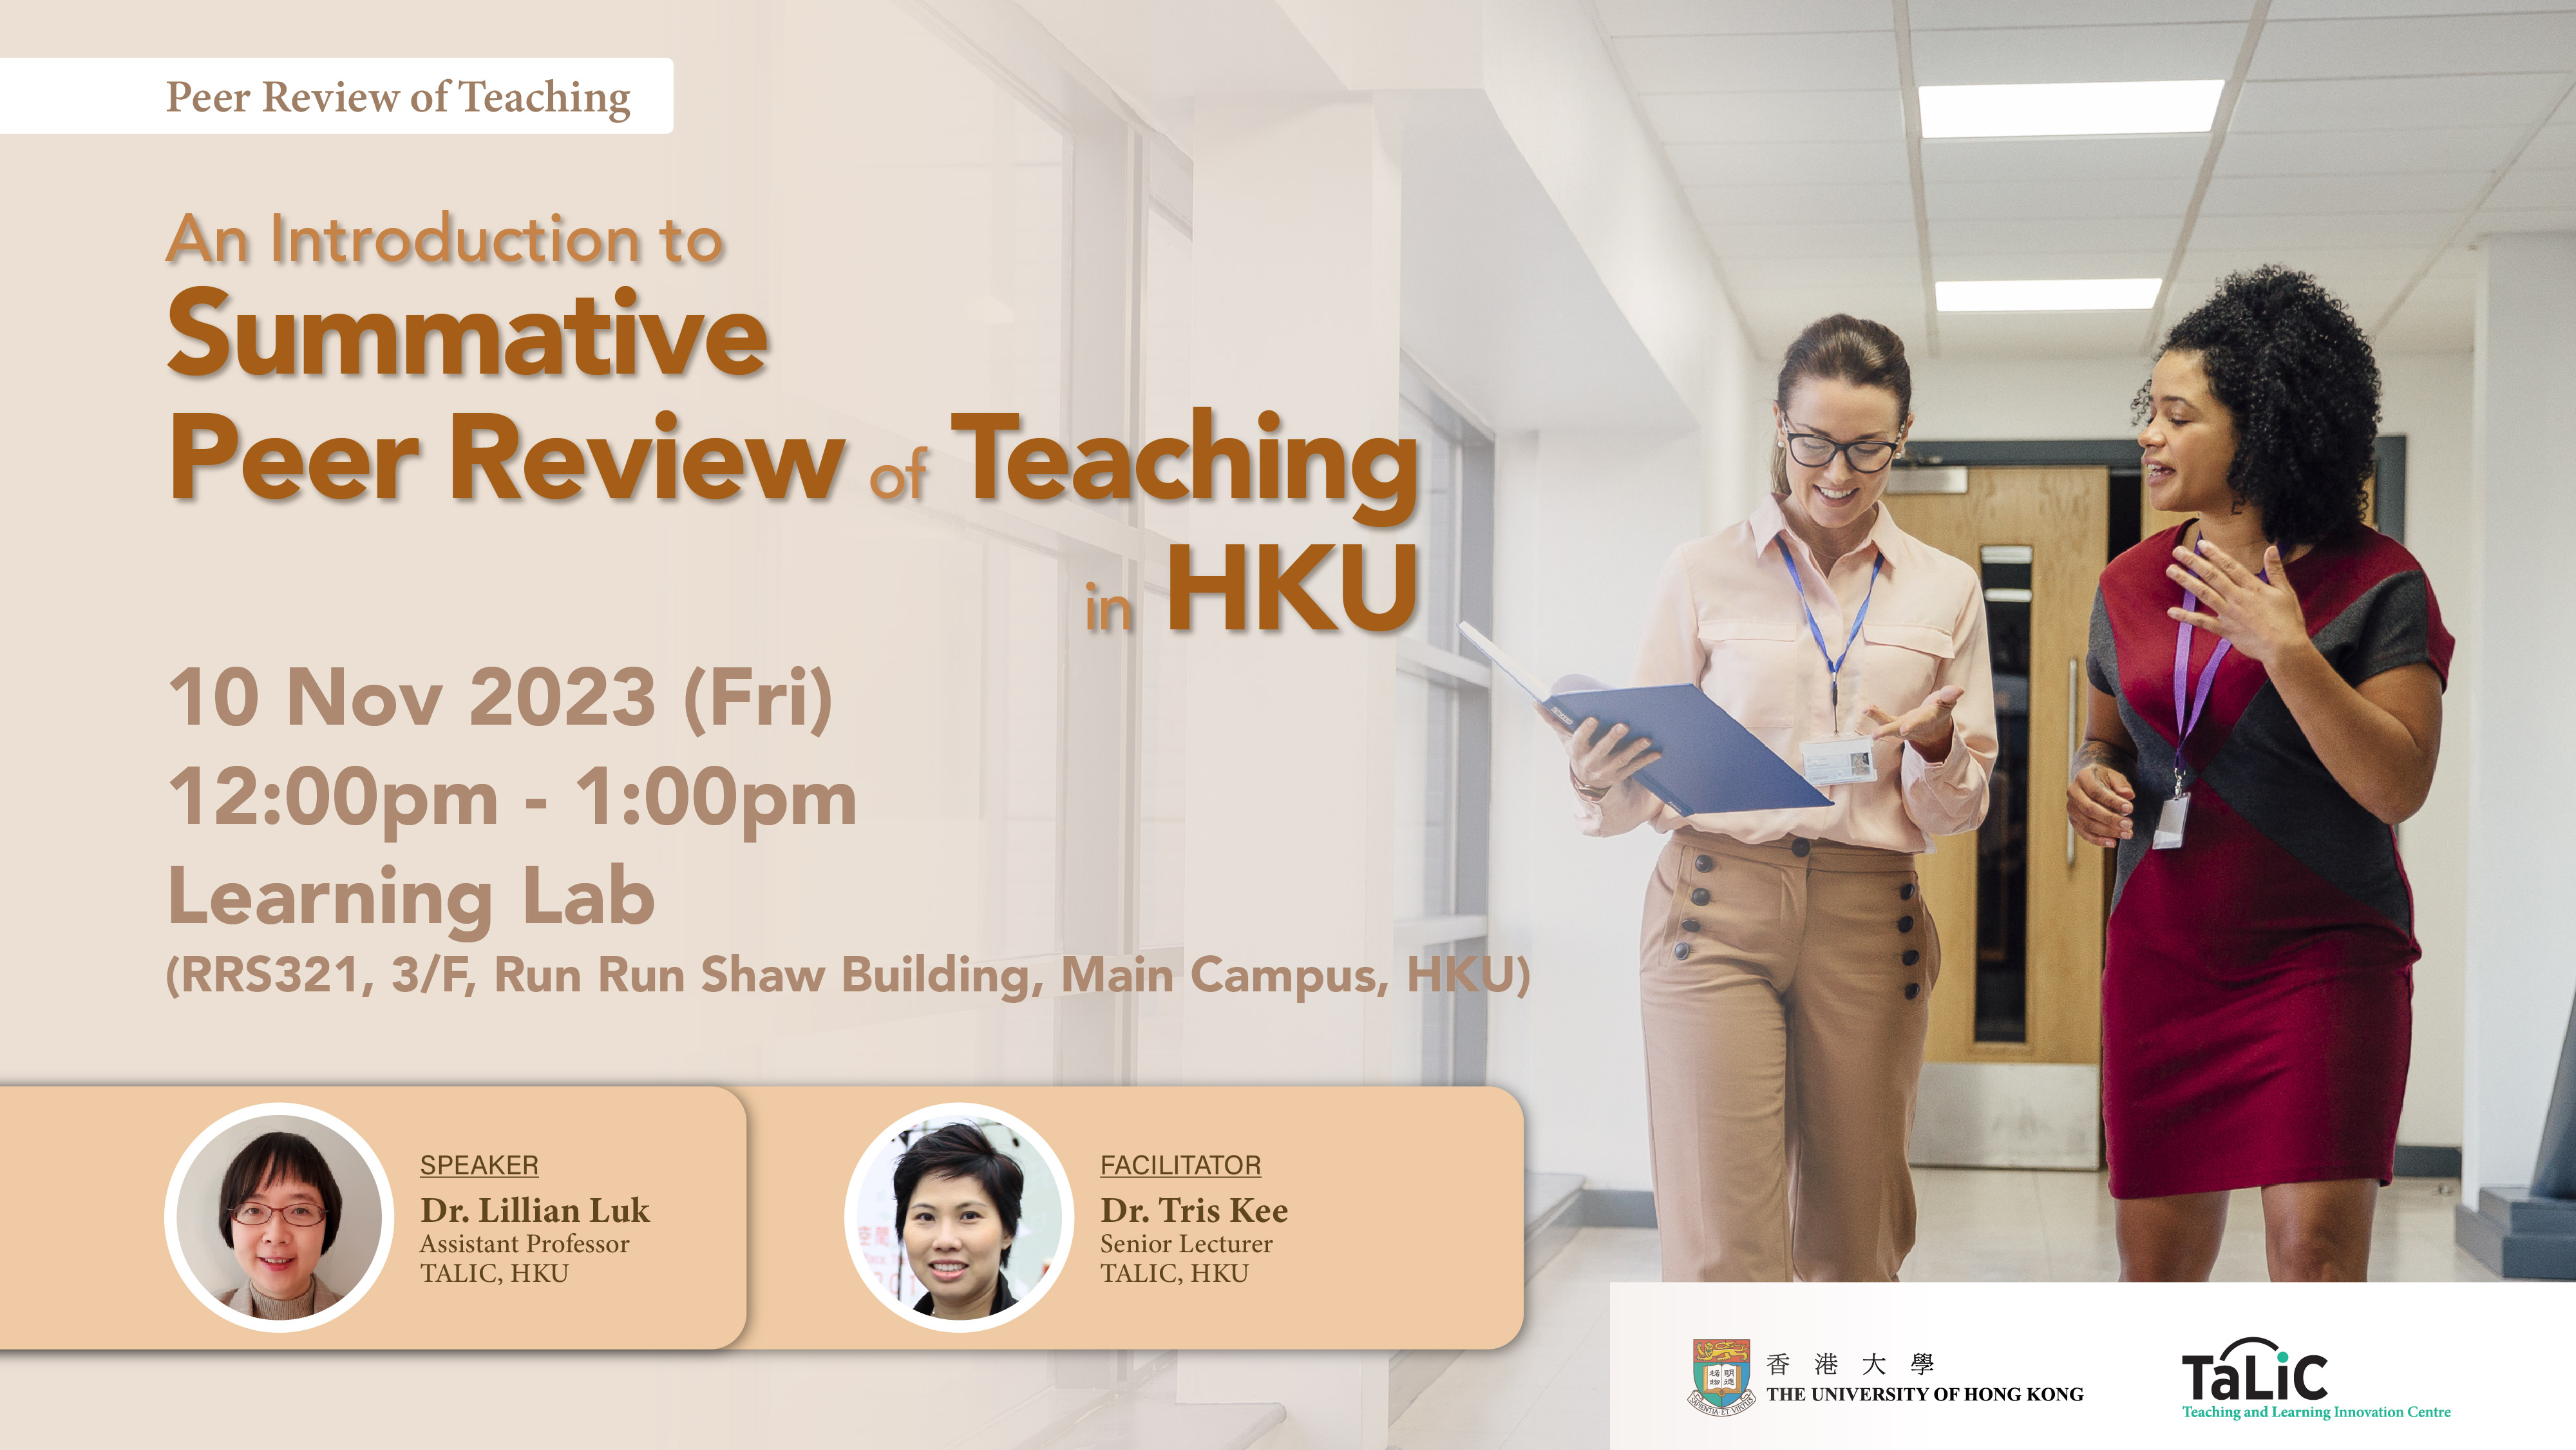 An Introduction to Summative Peer Review of Teaching in HKU